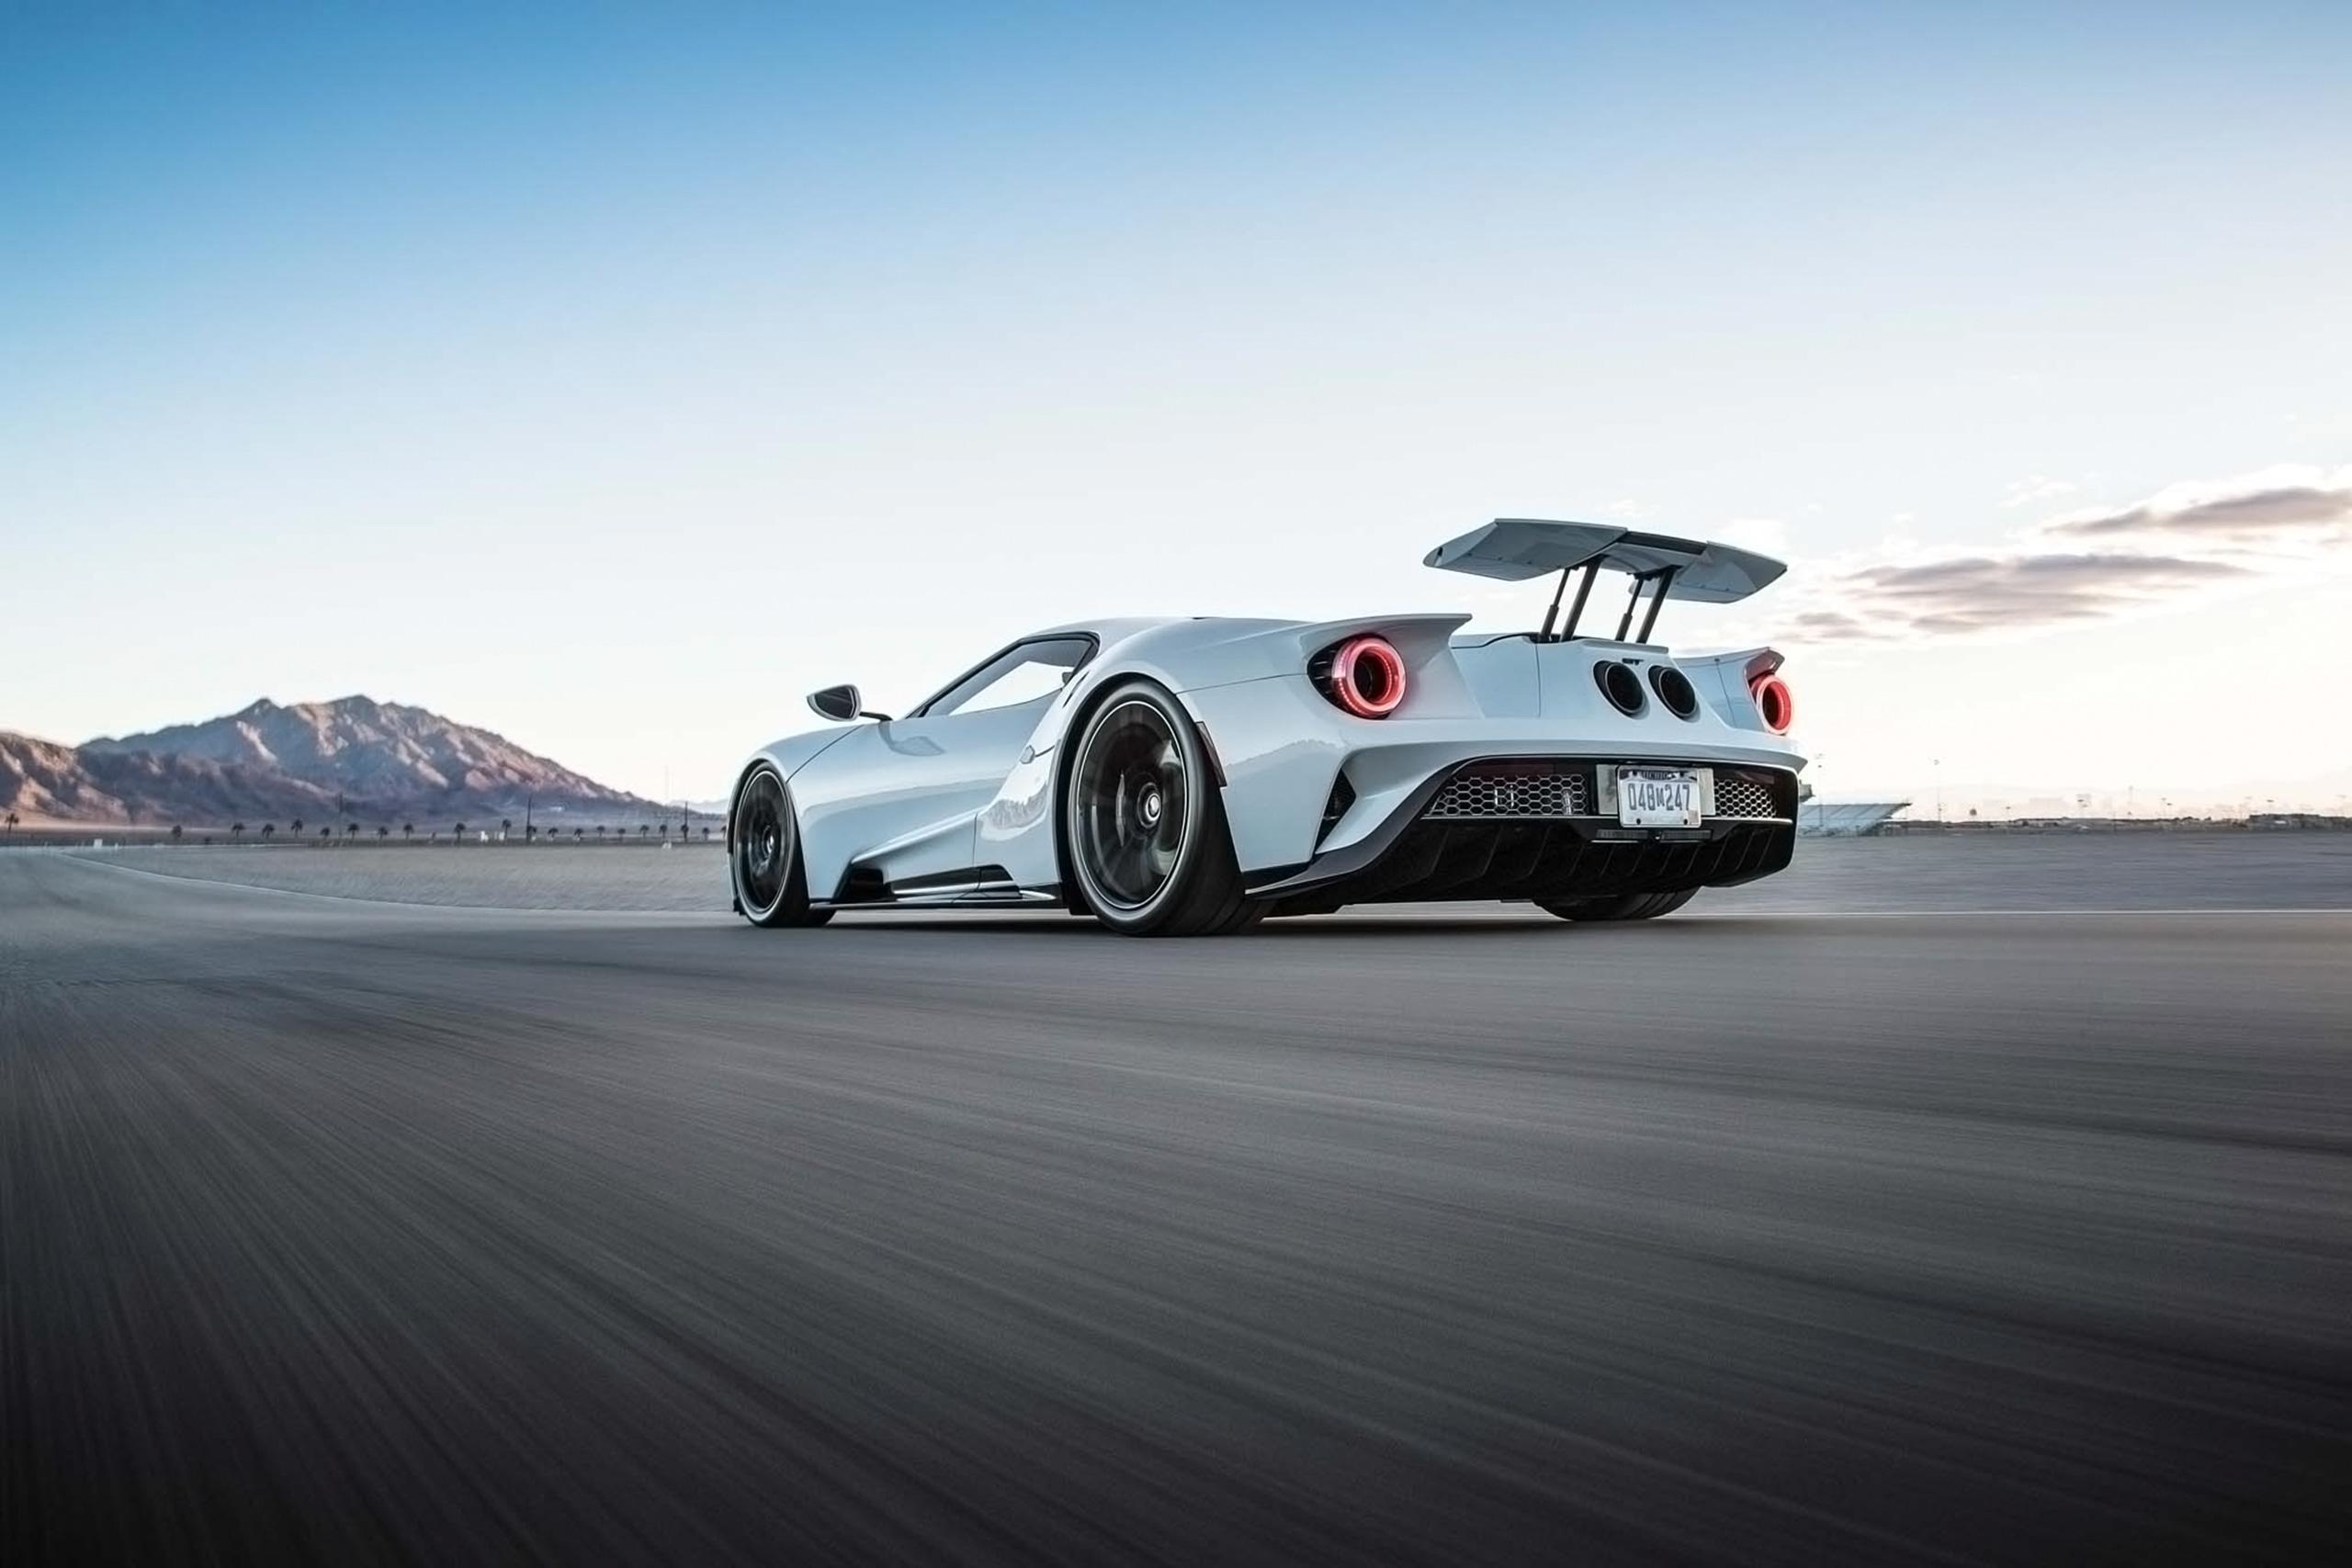 Ford Gt Wallpaper , Find HD Wallpaper For Free